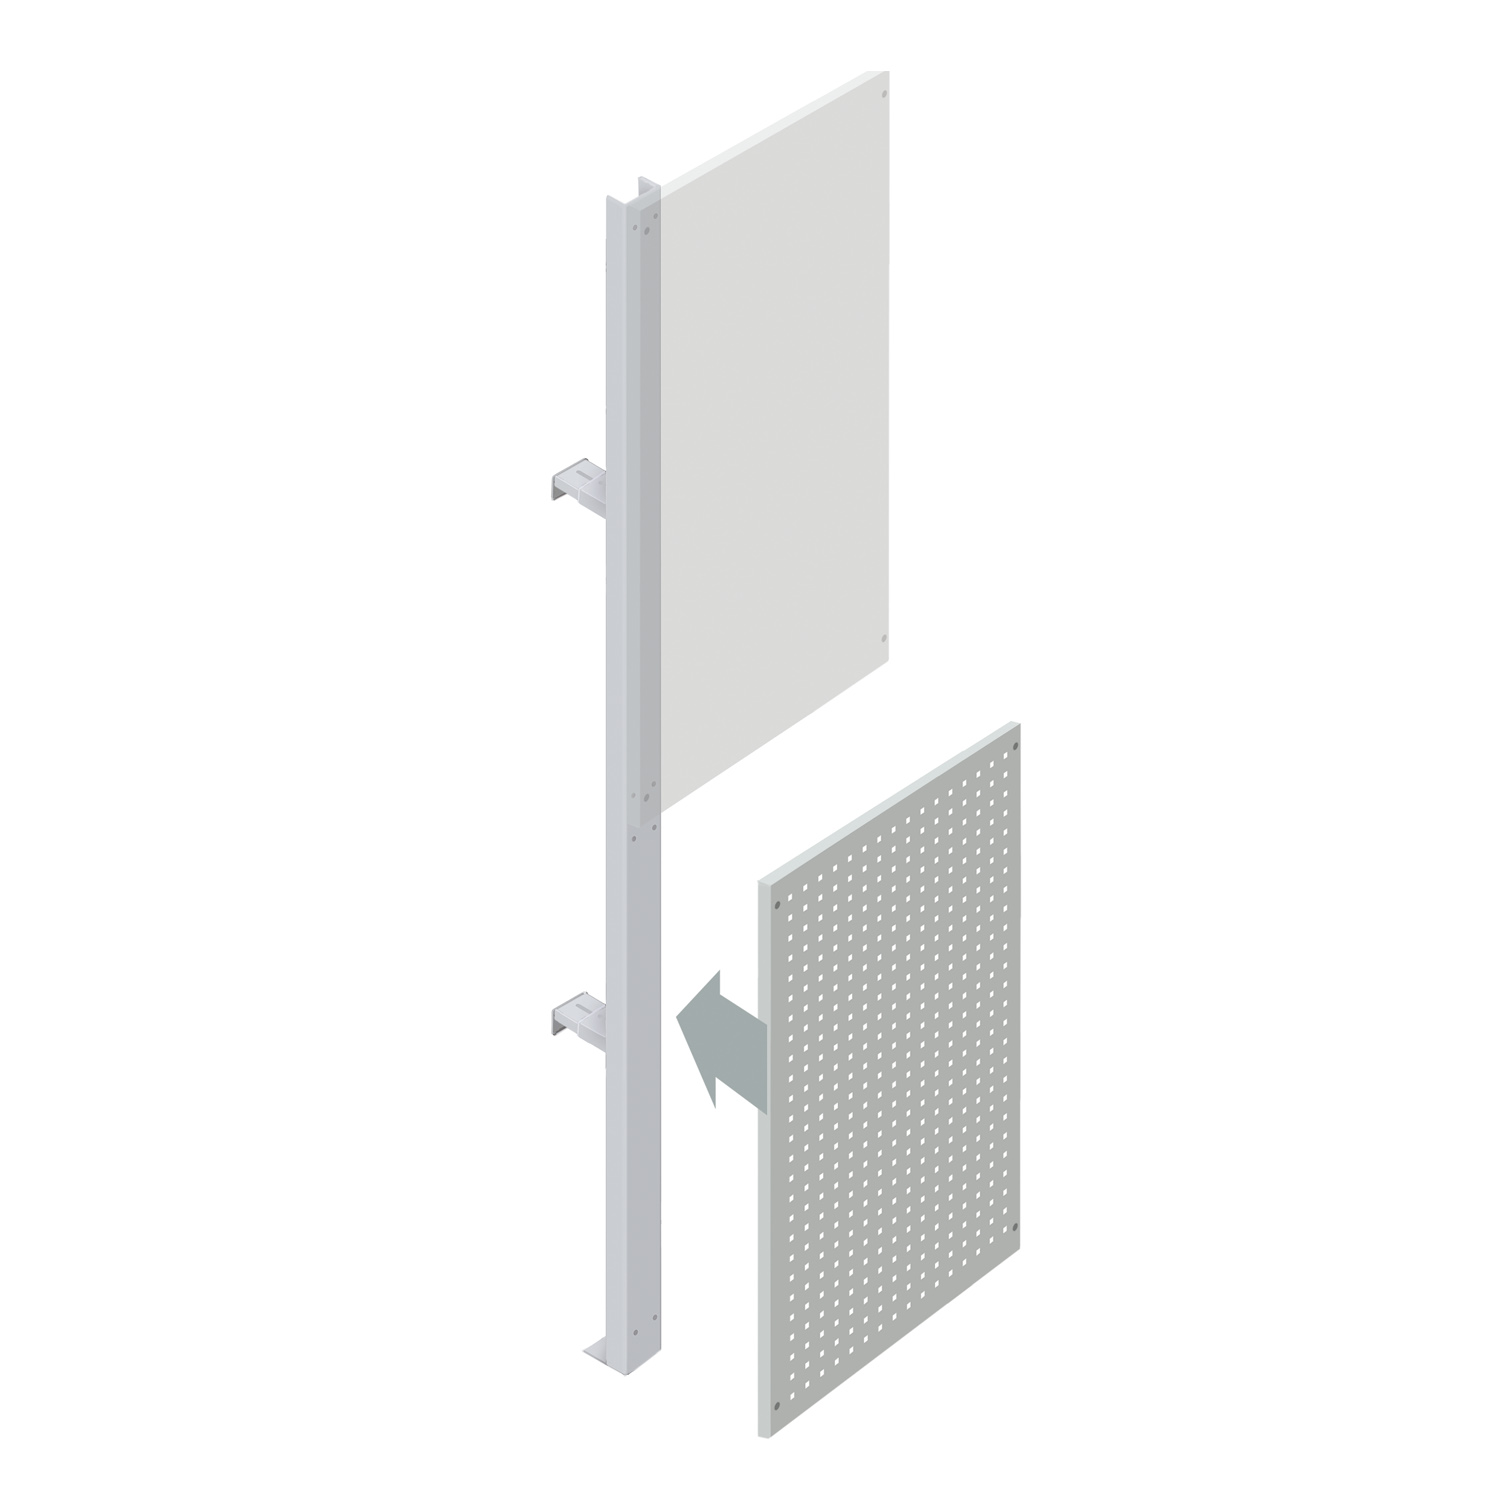 Lagere Squarepeg Partition Walling Panel (600mm)